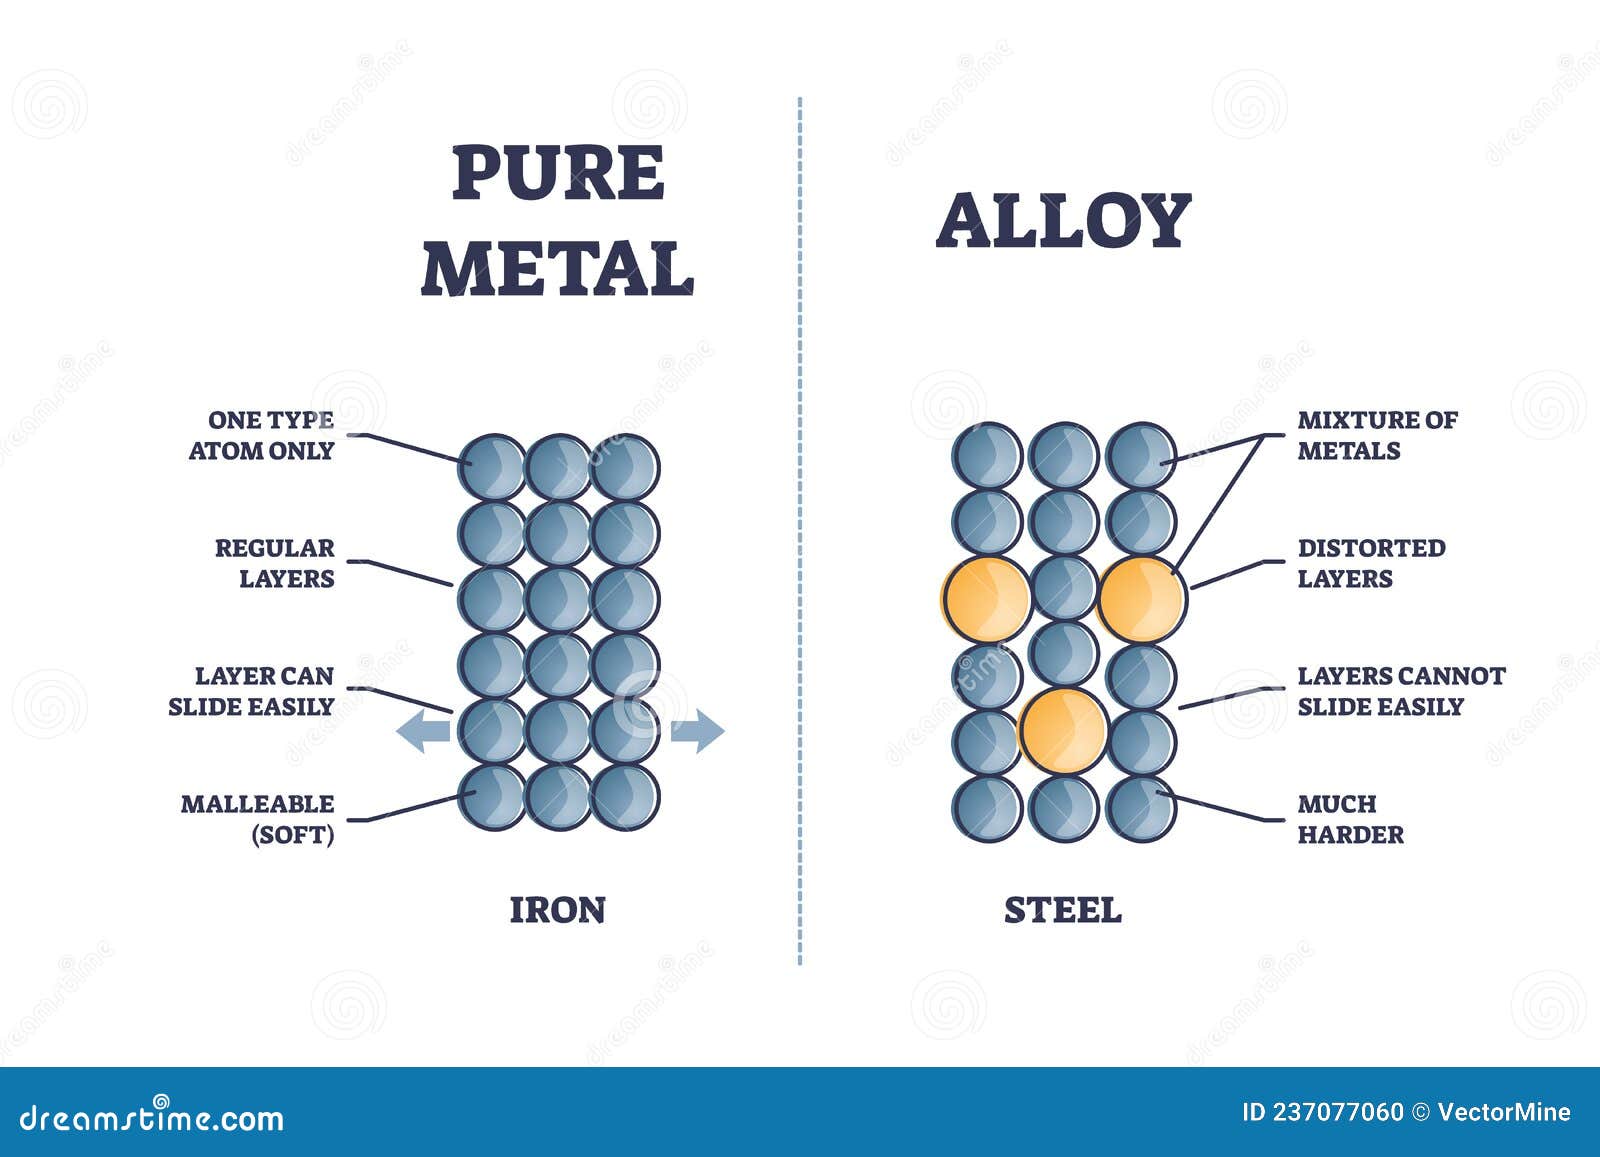 alloy vs pure metal comparison with iron and steel properties outline diagram